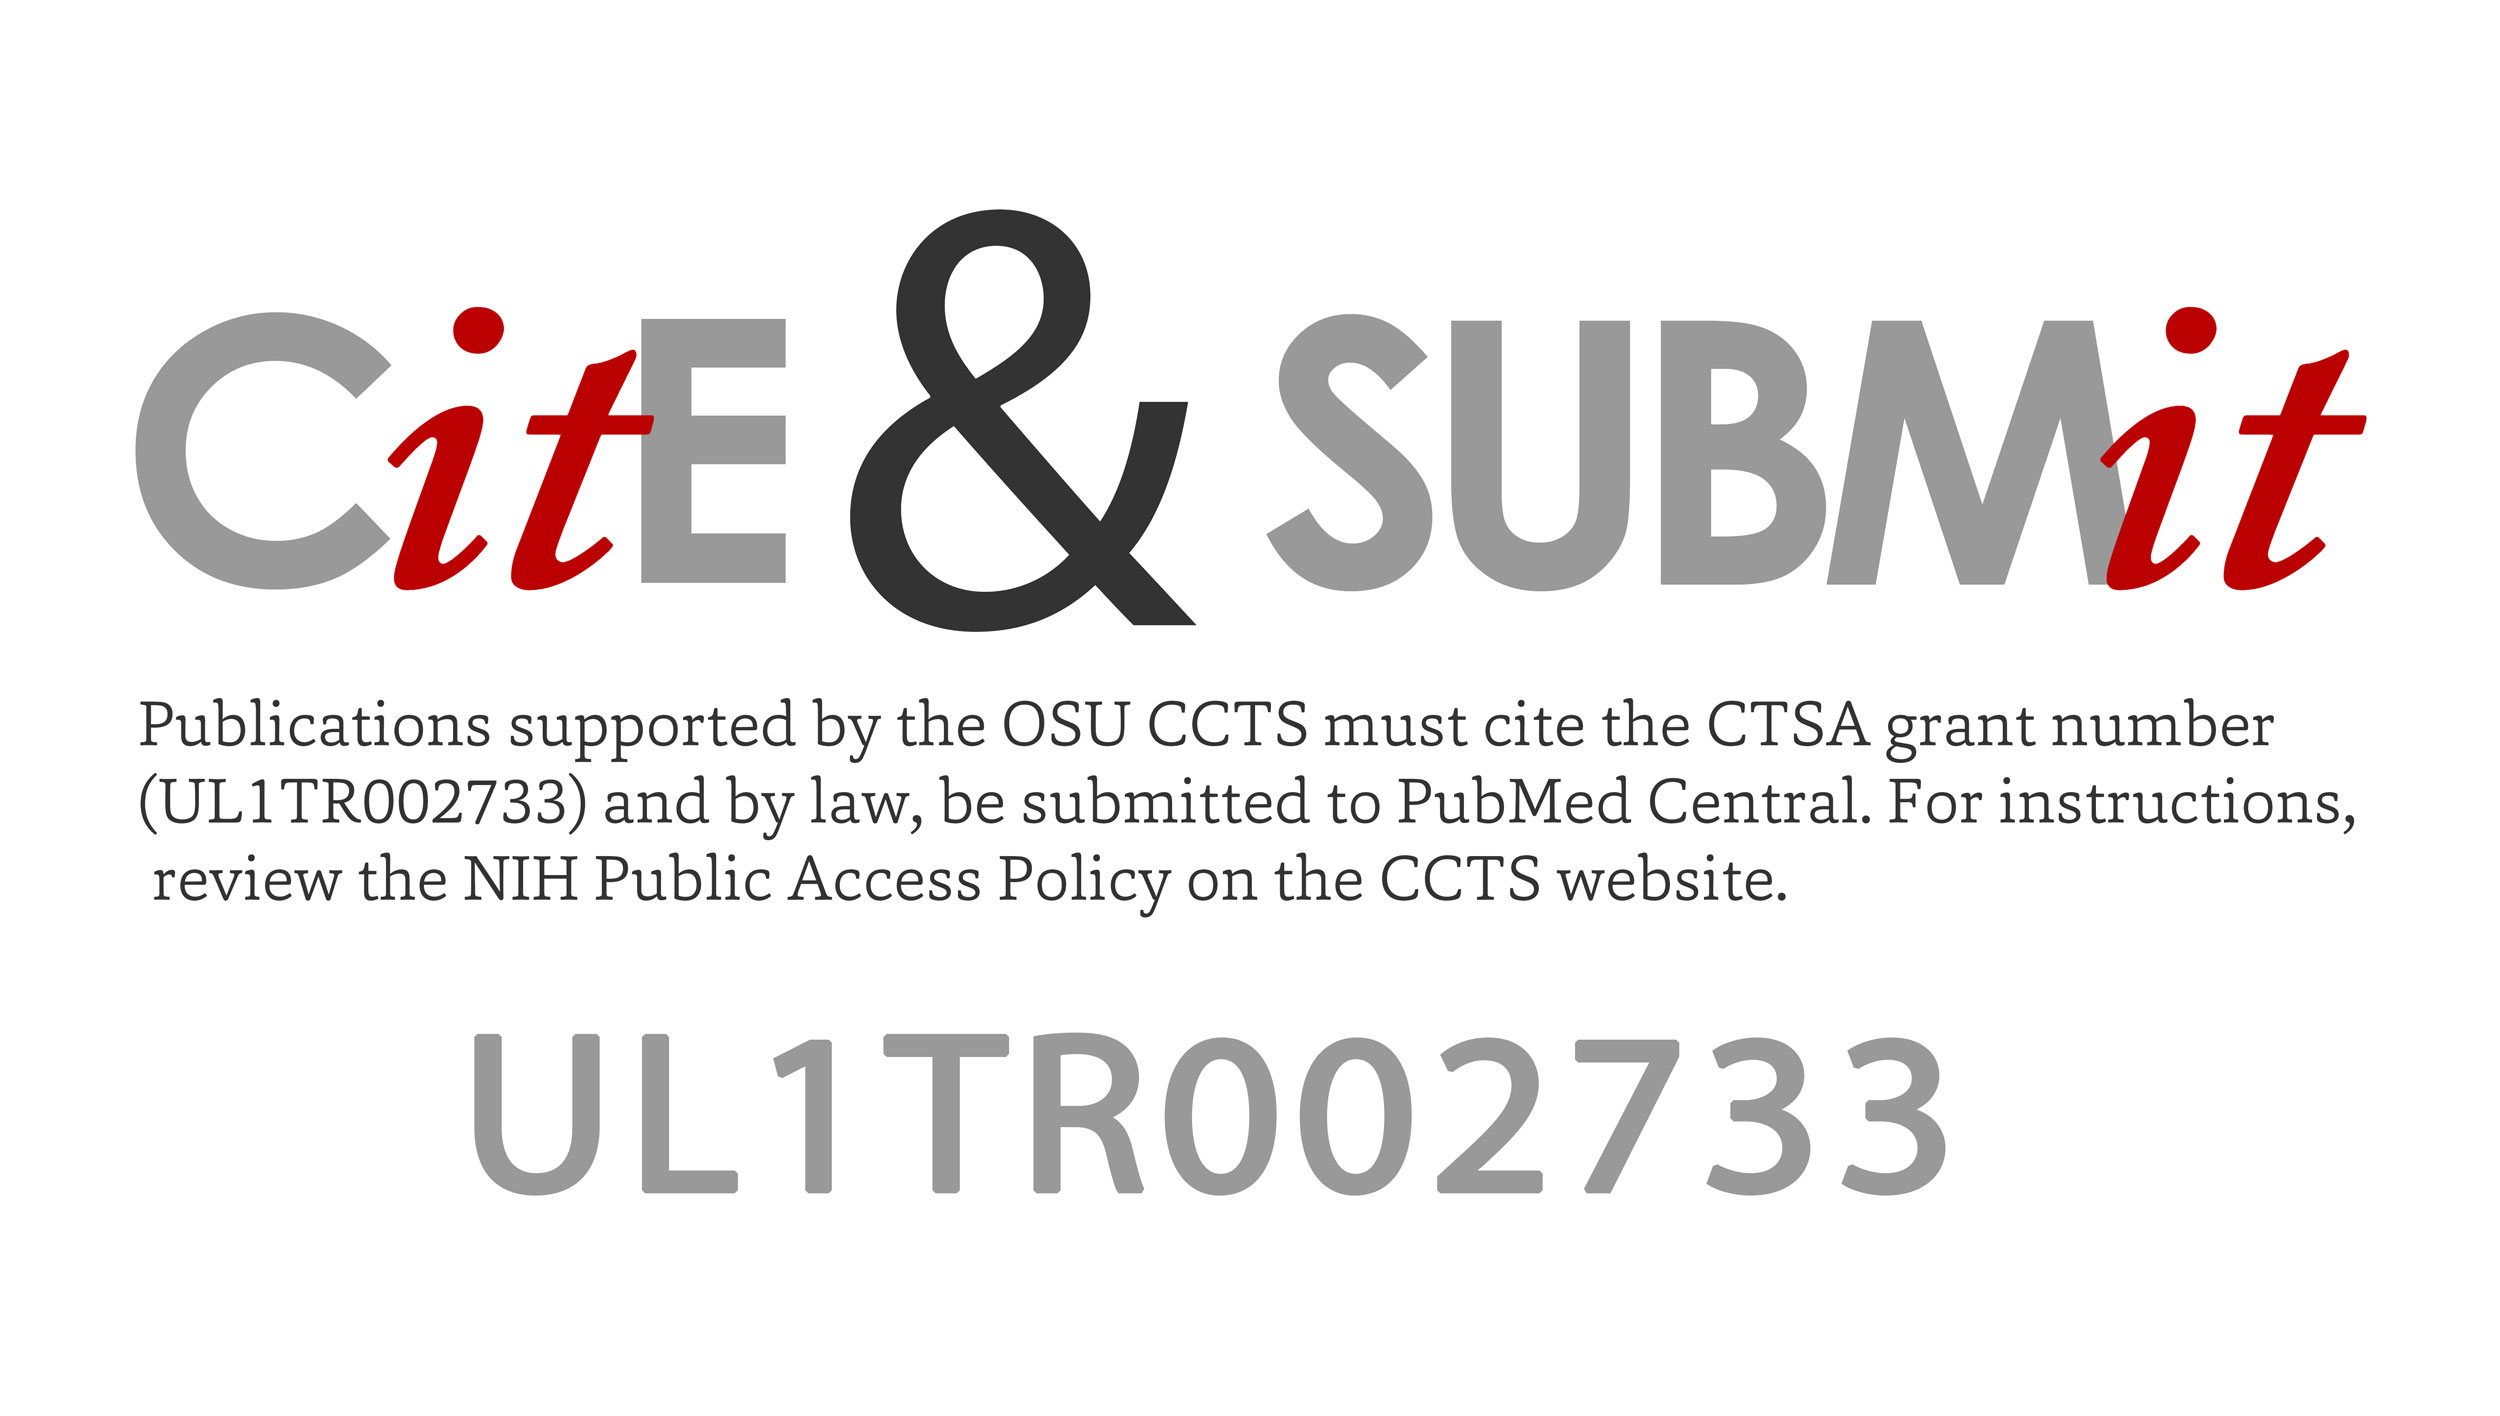 cite and submit